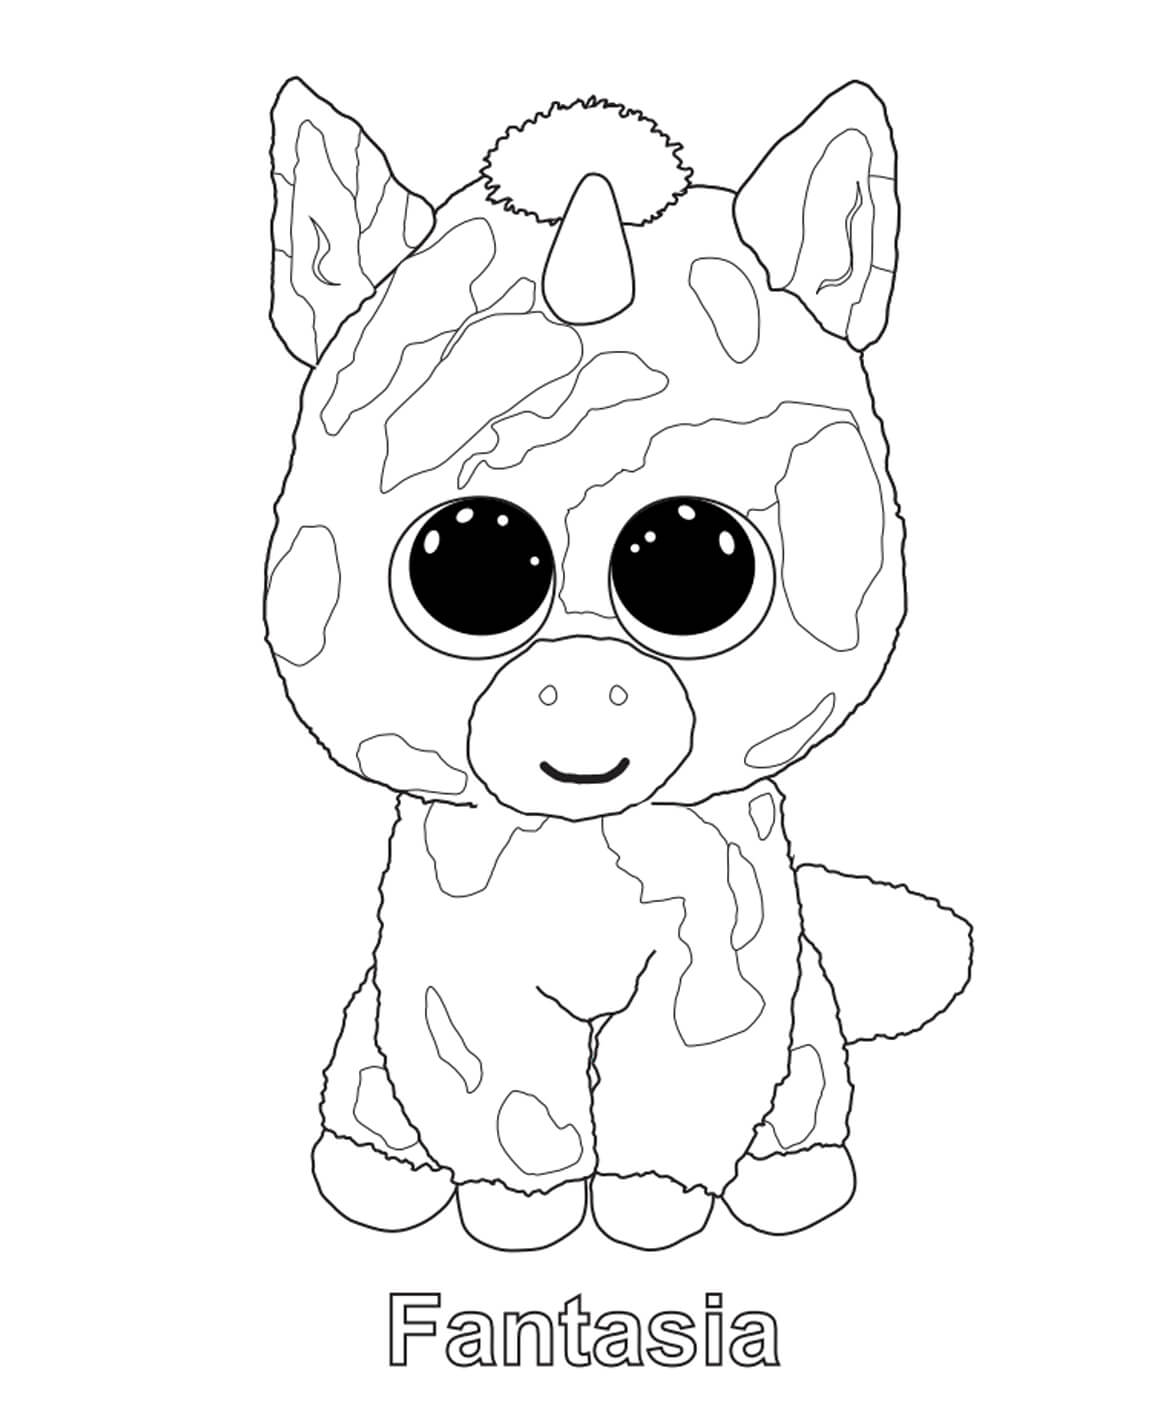 Fantasia - Beanie Boo Coloring Pages